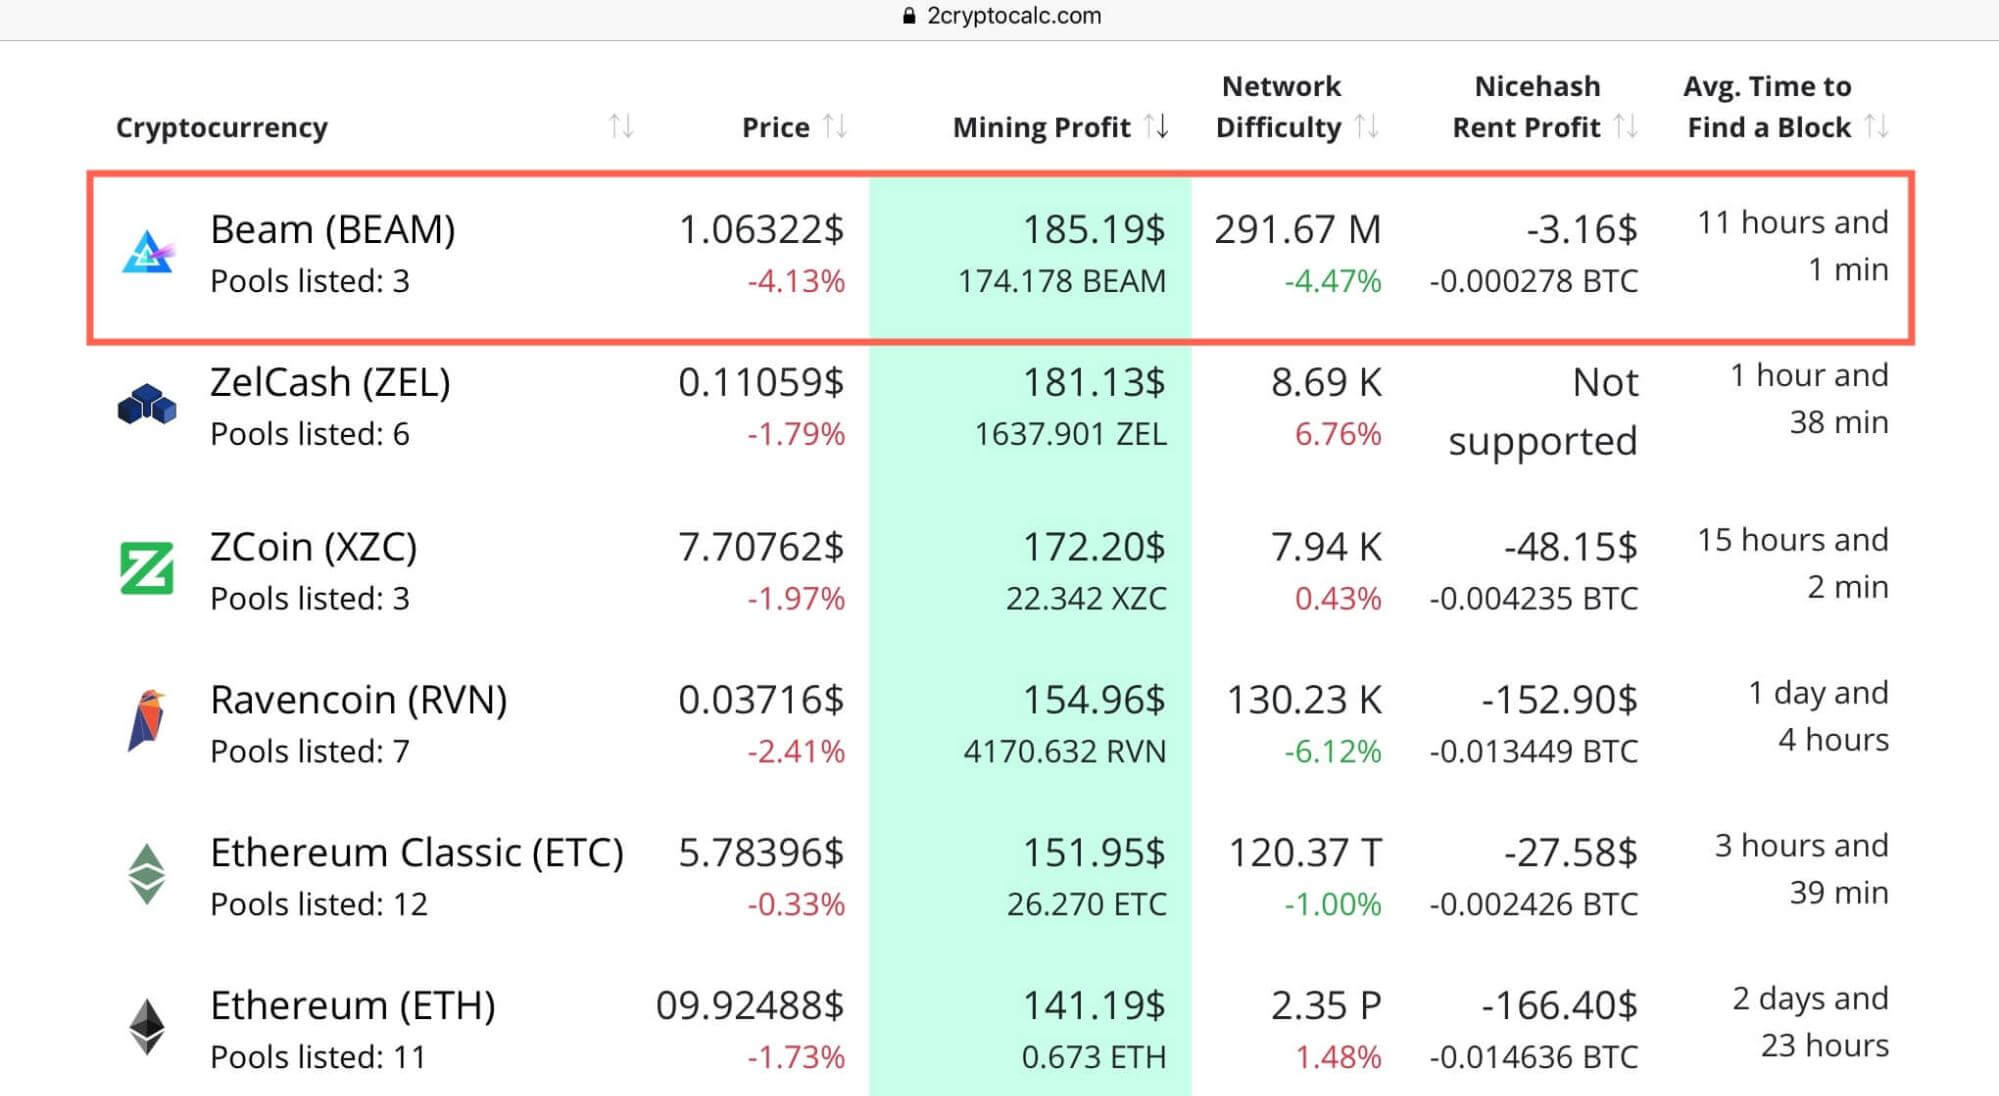 ethereum mmining pool or nicehash which is more profitable